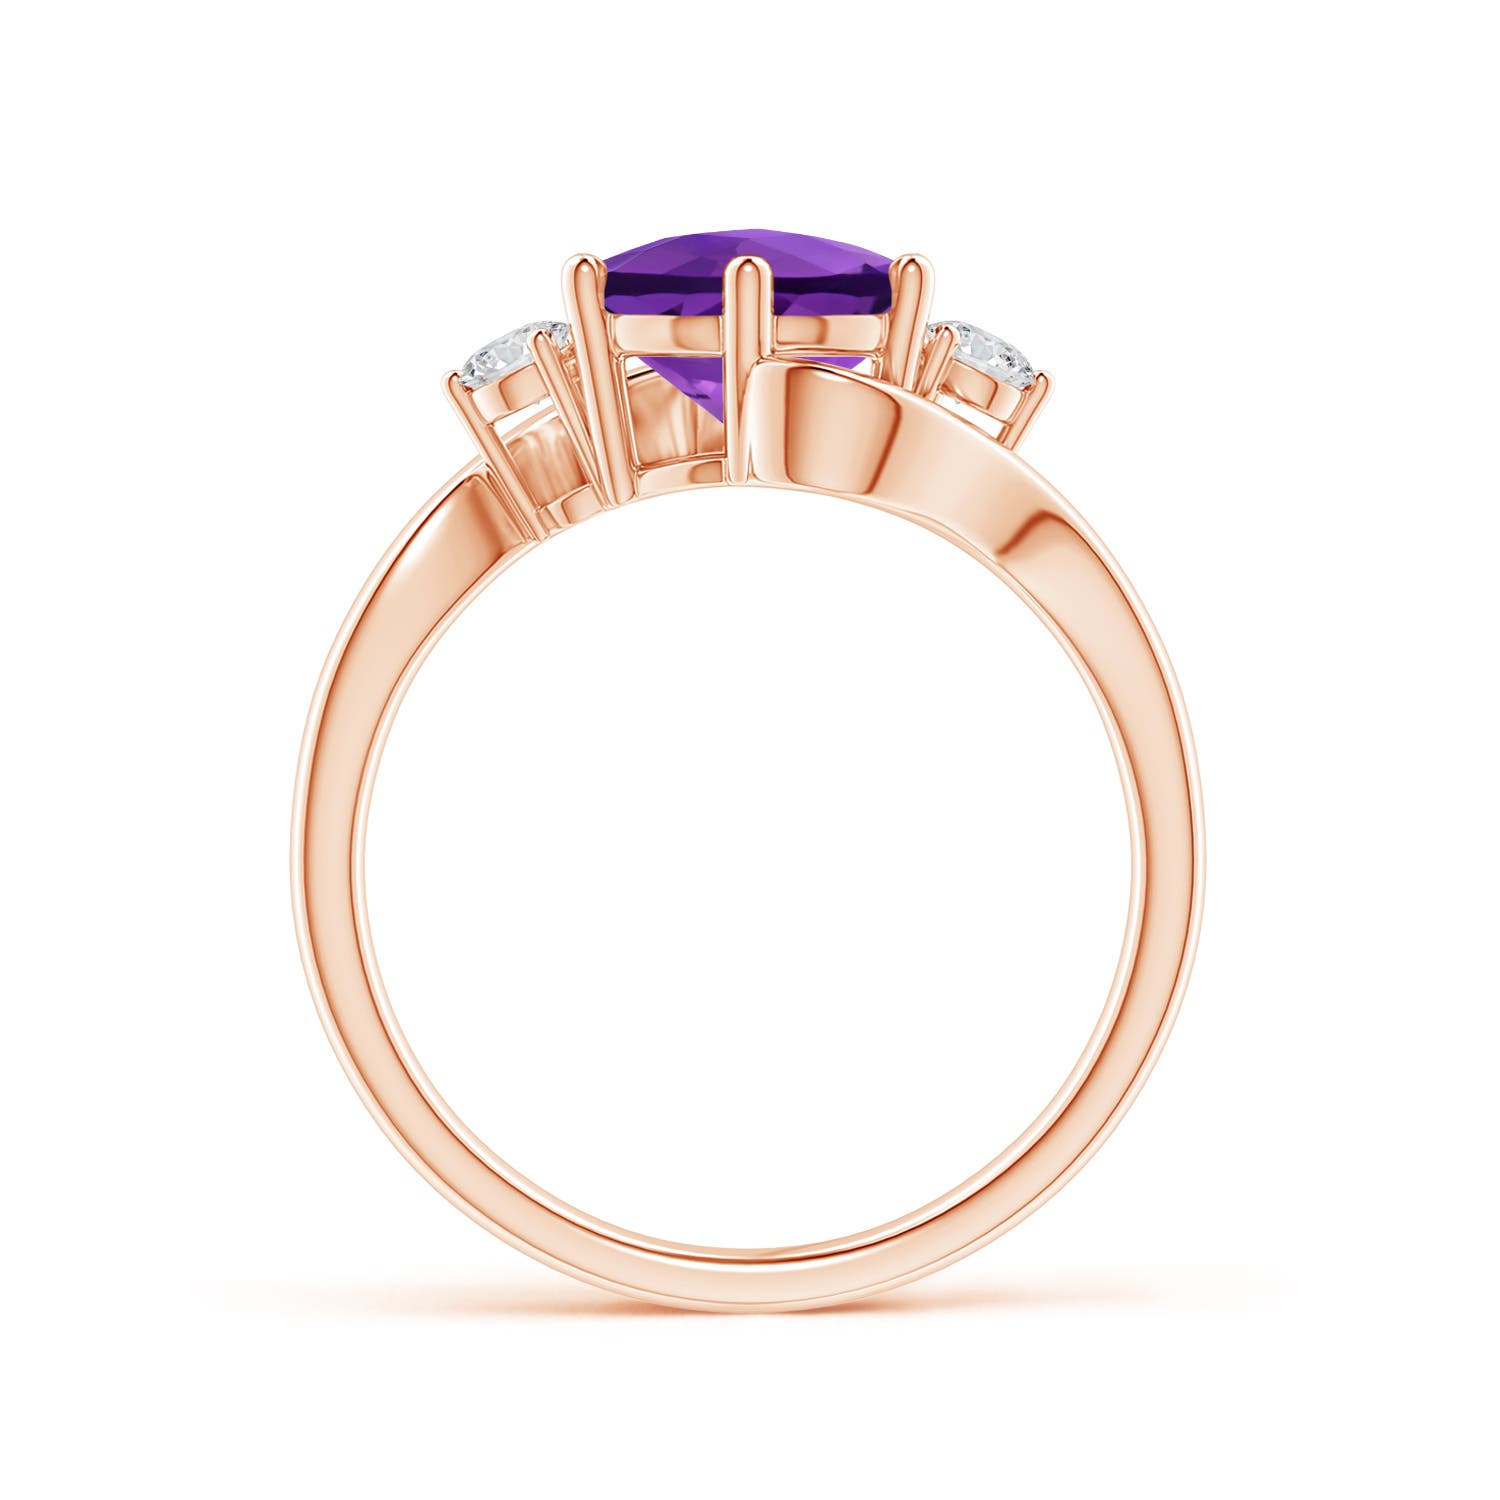 AAA - Amethyst / 1.84 CT / 14 KT Rose Gold